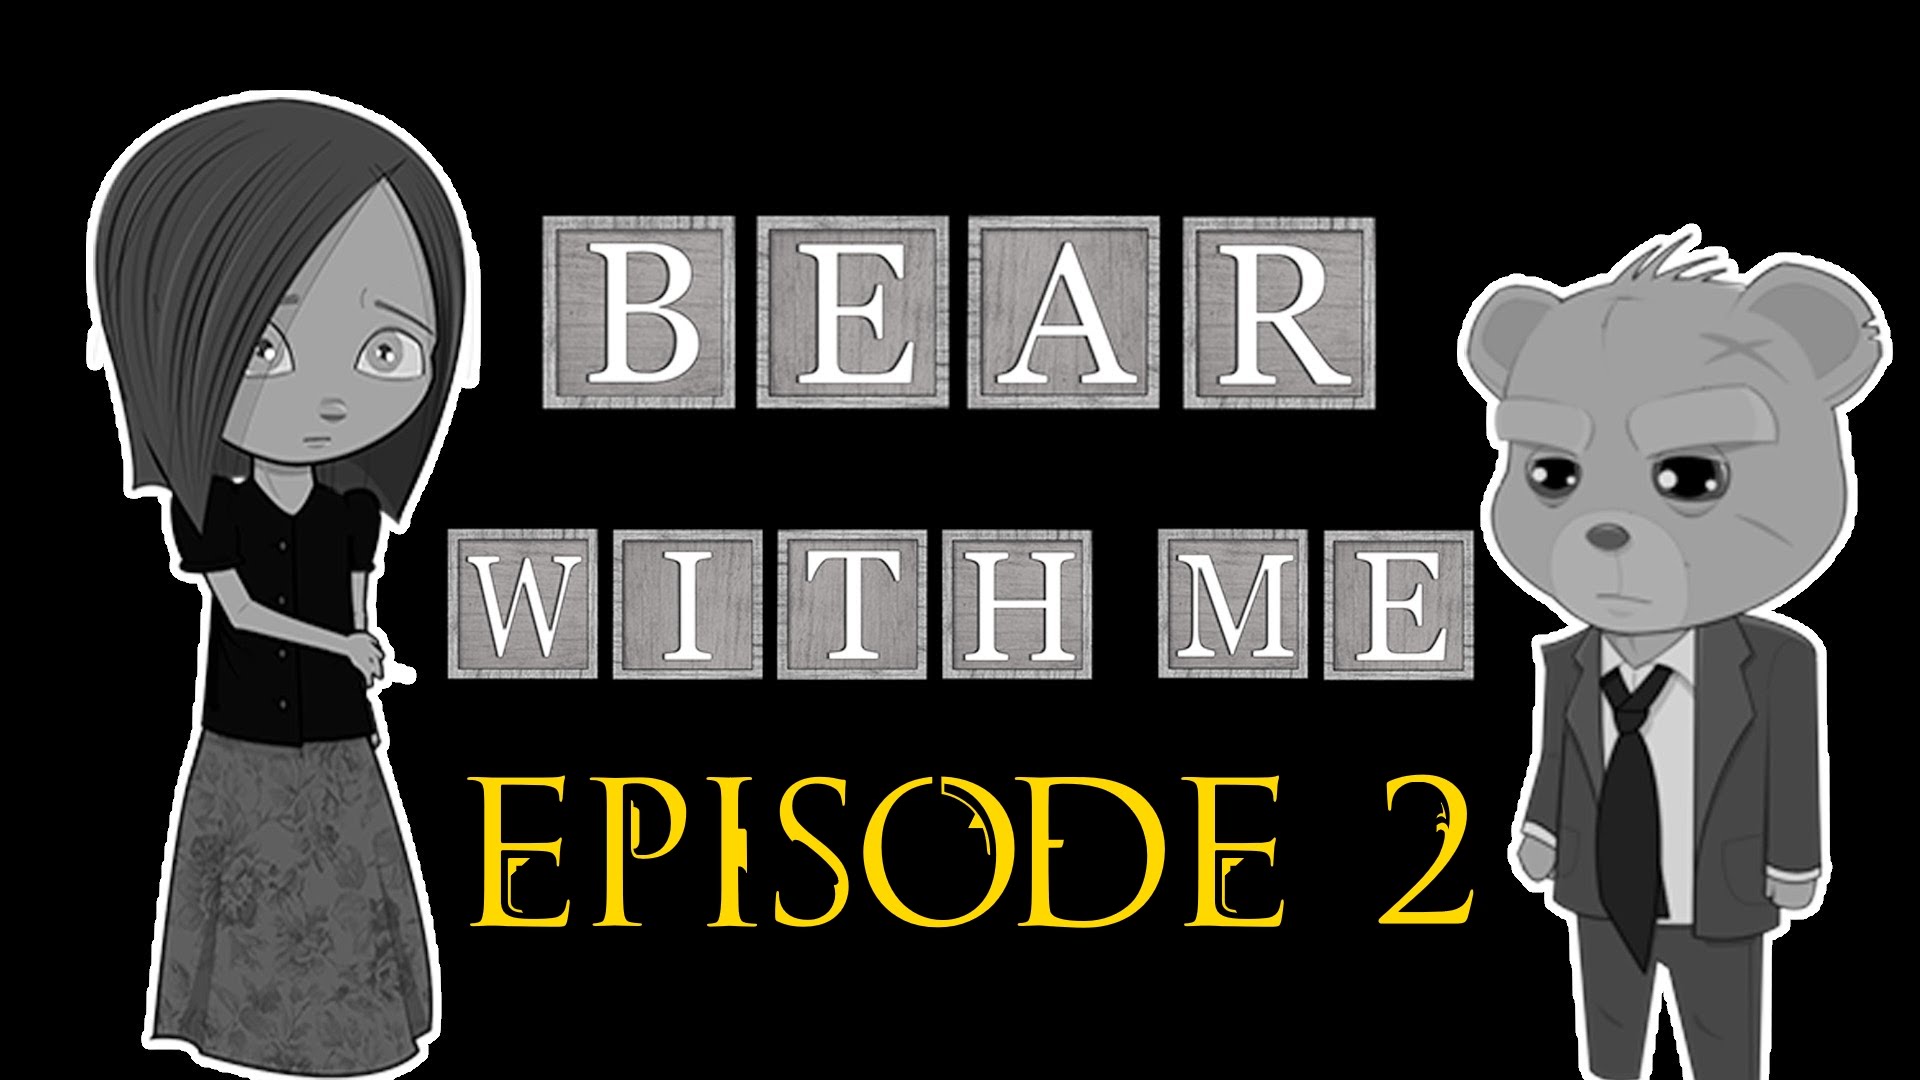 download bear with me mac episode 2 torrent